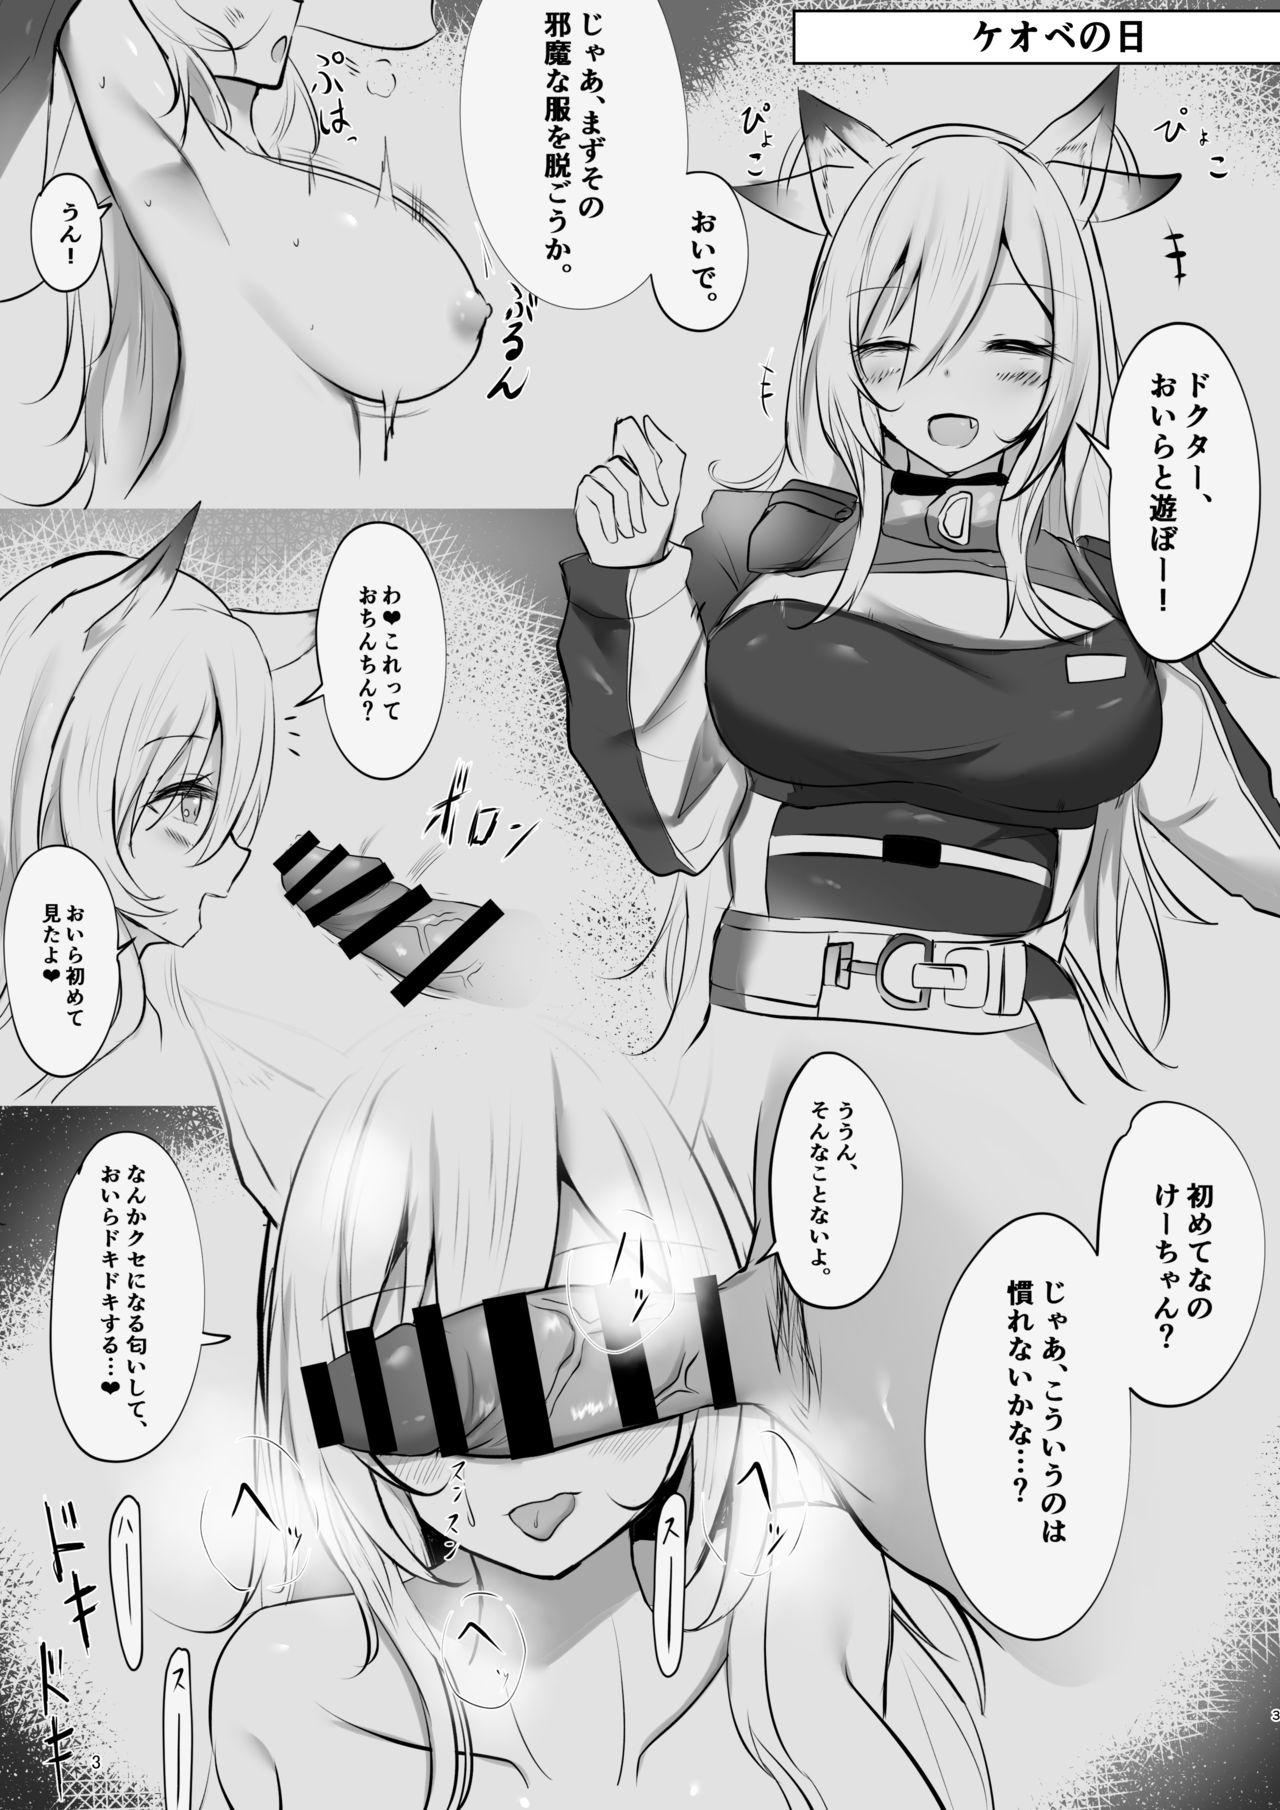 Shy 夜な夜な扇情作戦記録 - Arknights Pussy Eating - Page 3